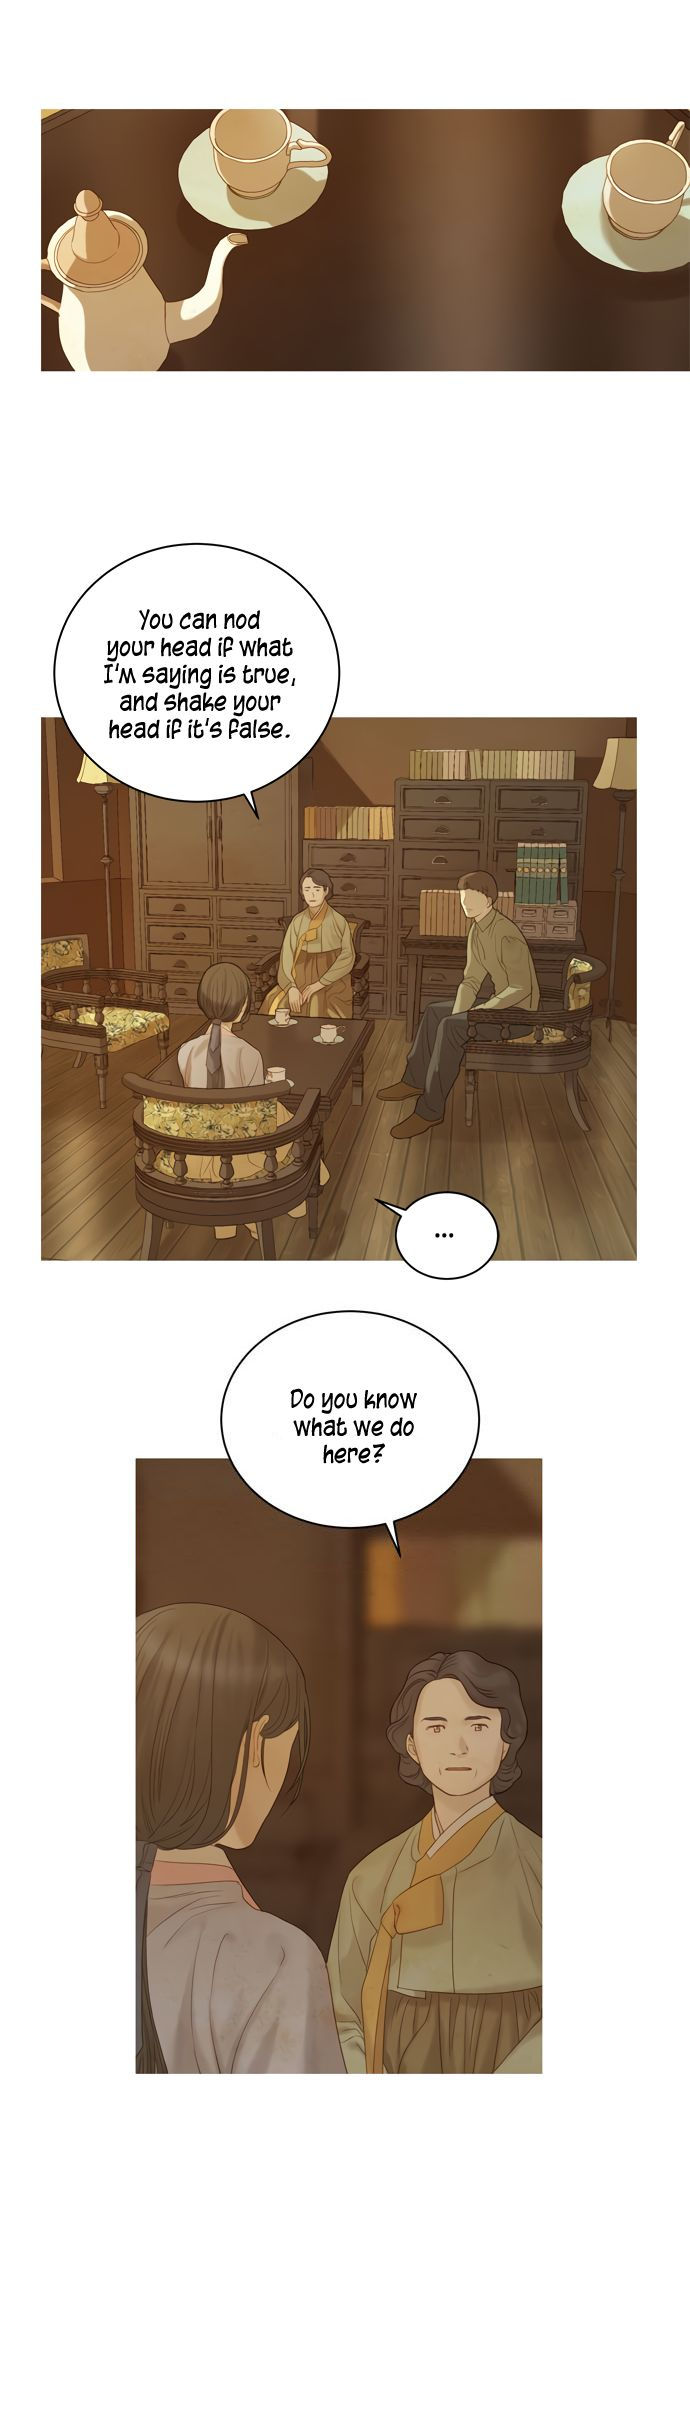 Gorae Byul - The Gyeongseong Mermaid - Chapter 20 Page 16